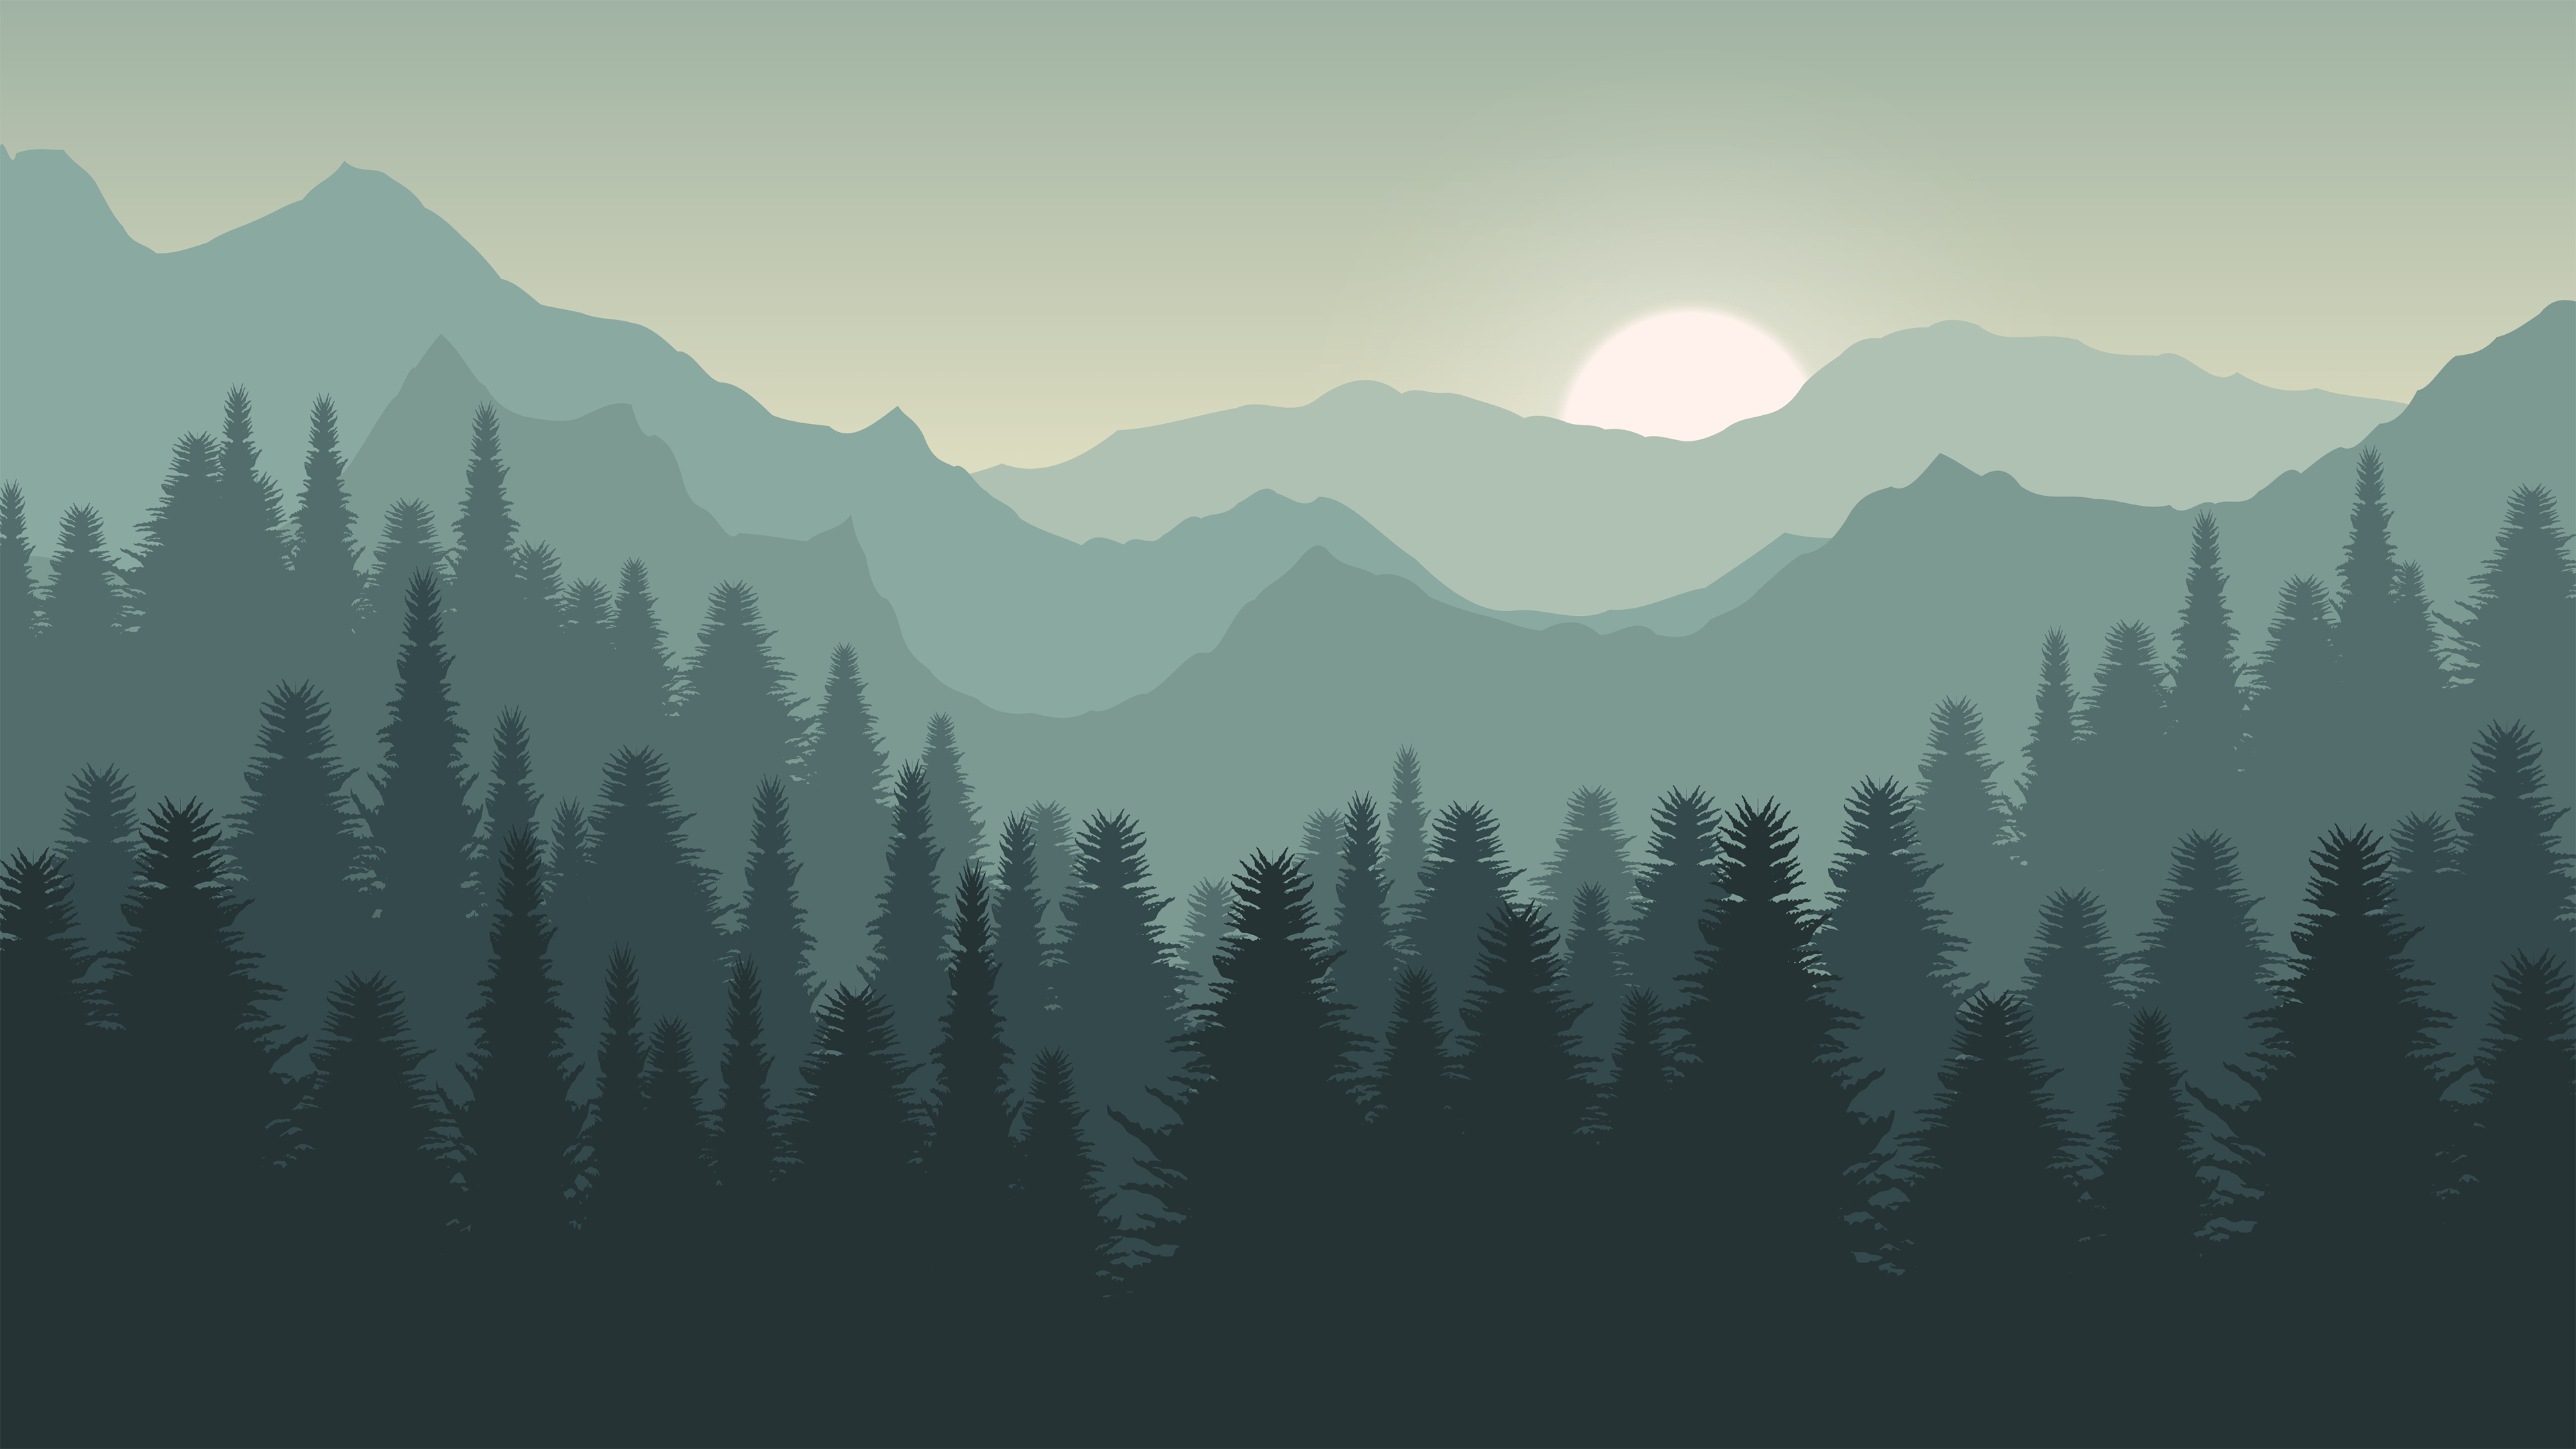 A forest with mountains in the background - 3840x2160